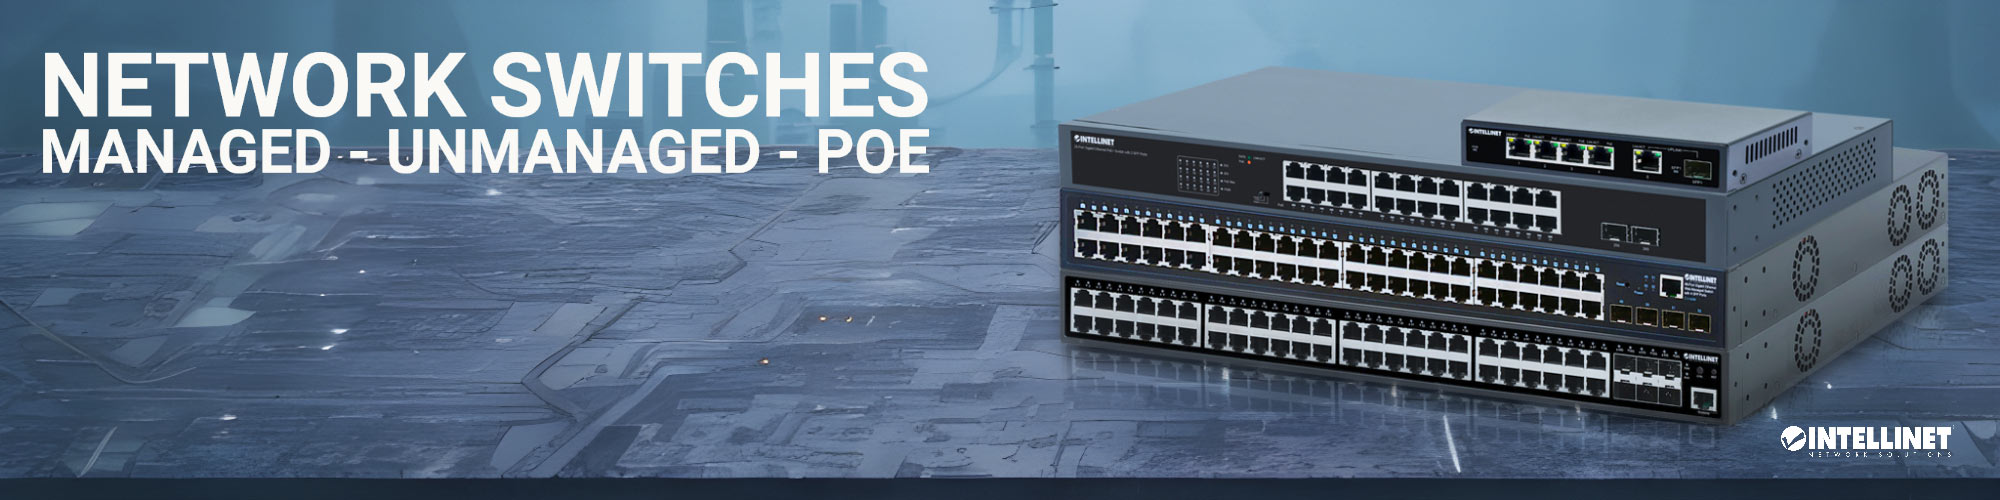 Network Switches - PoE Switches - Industrial Switches